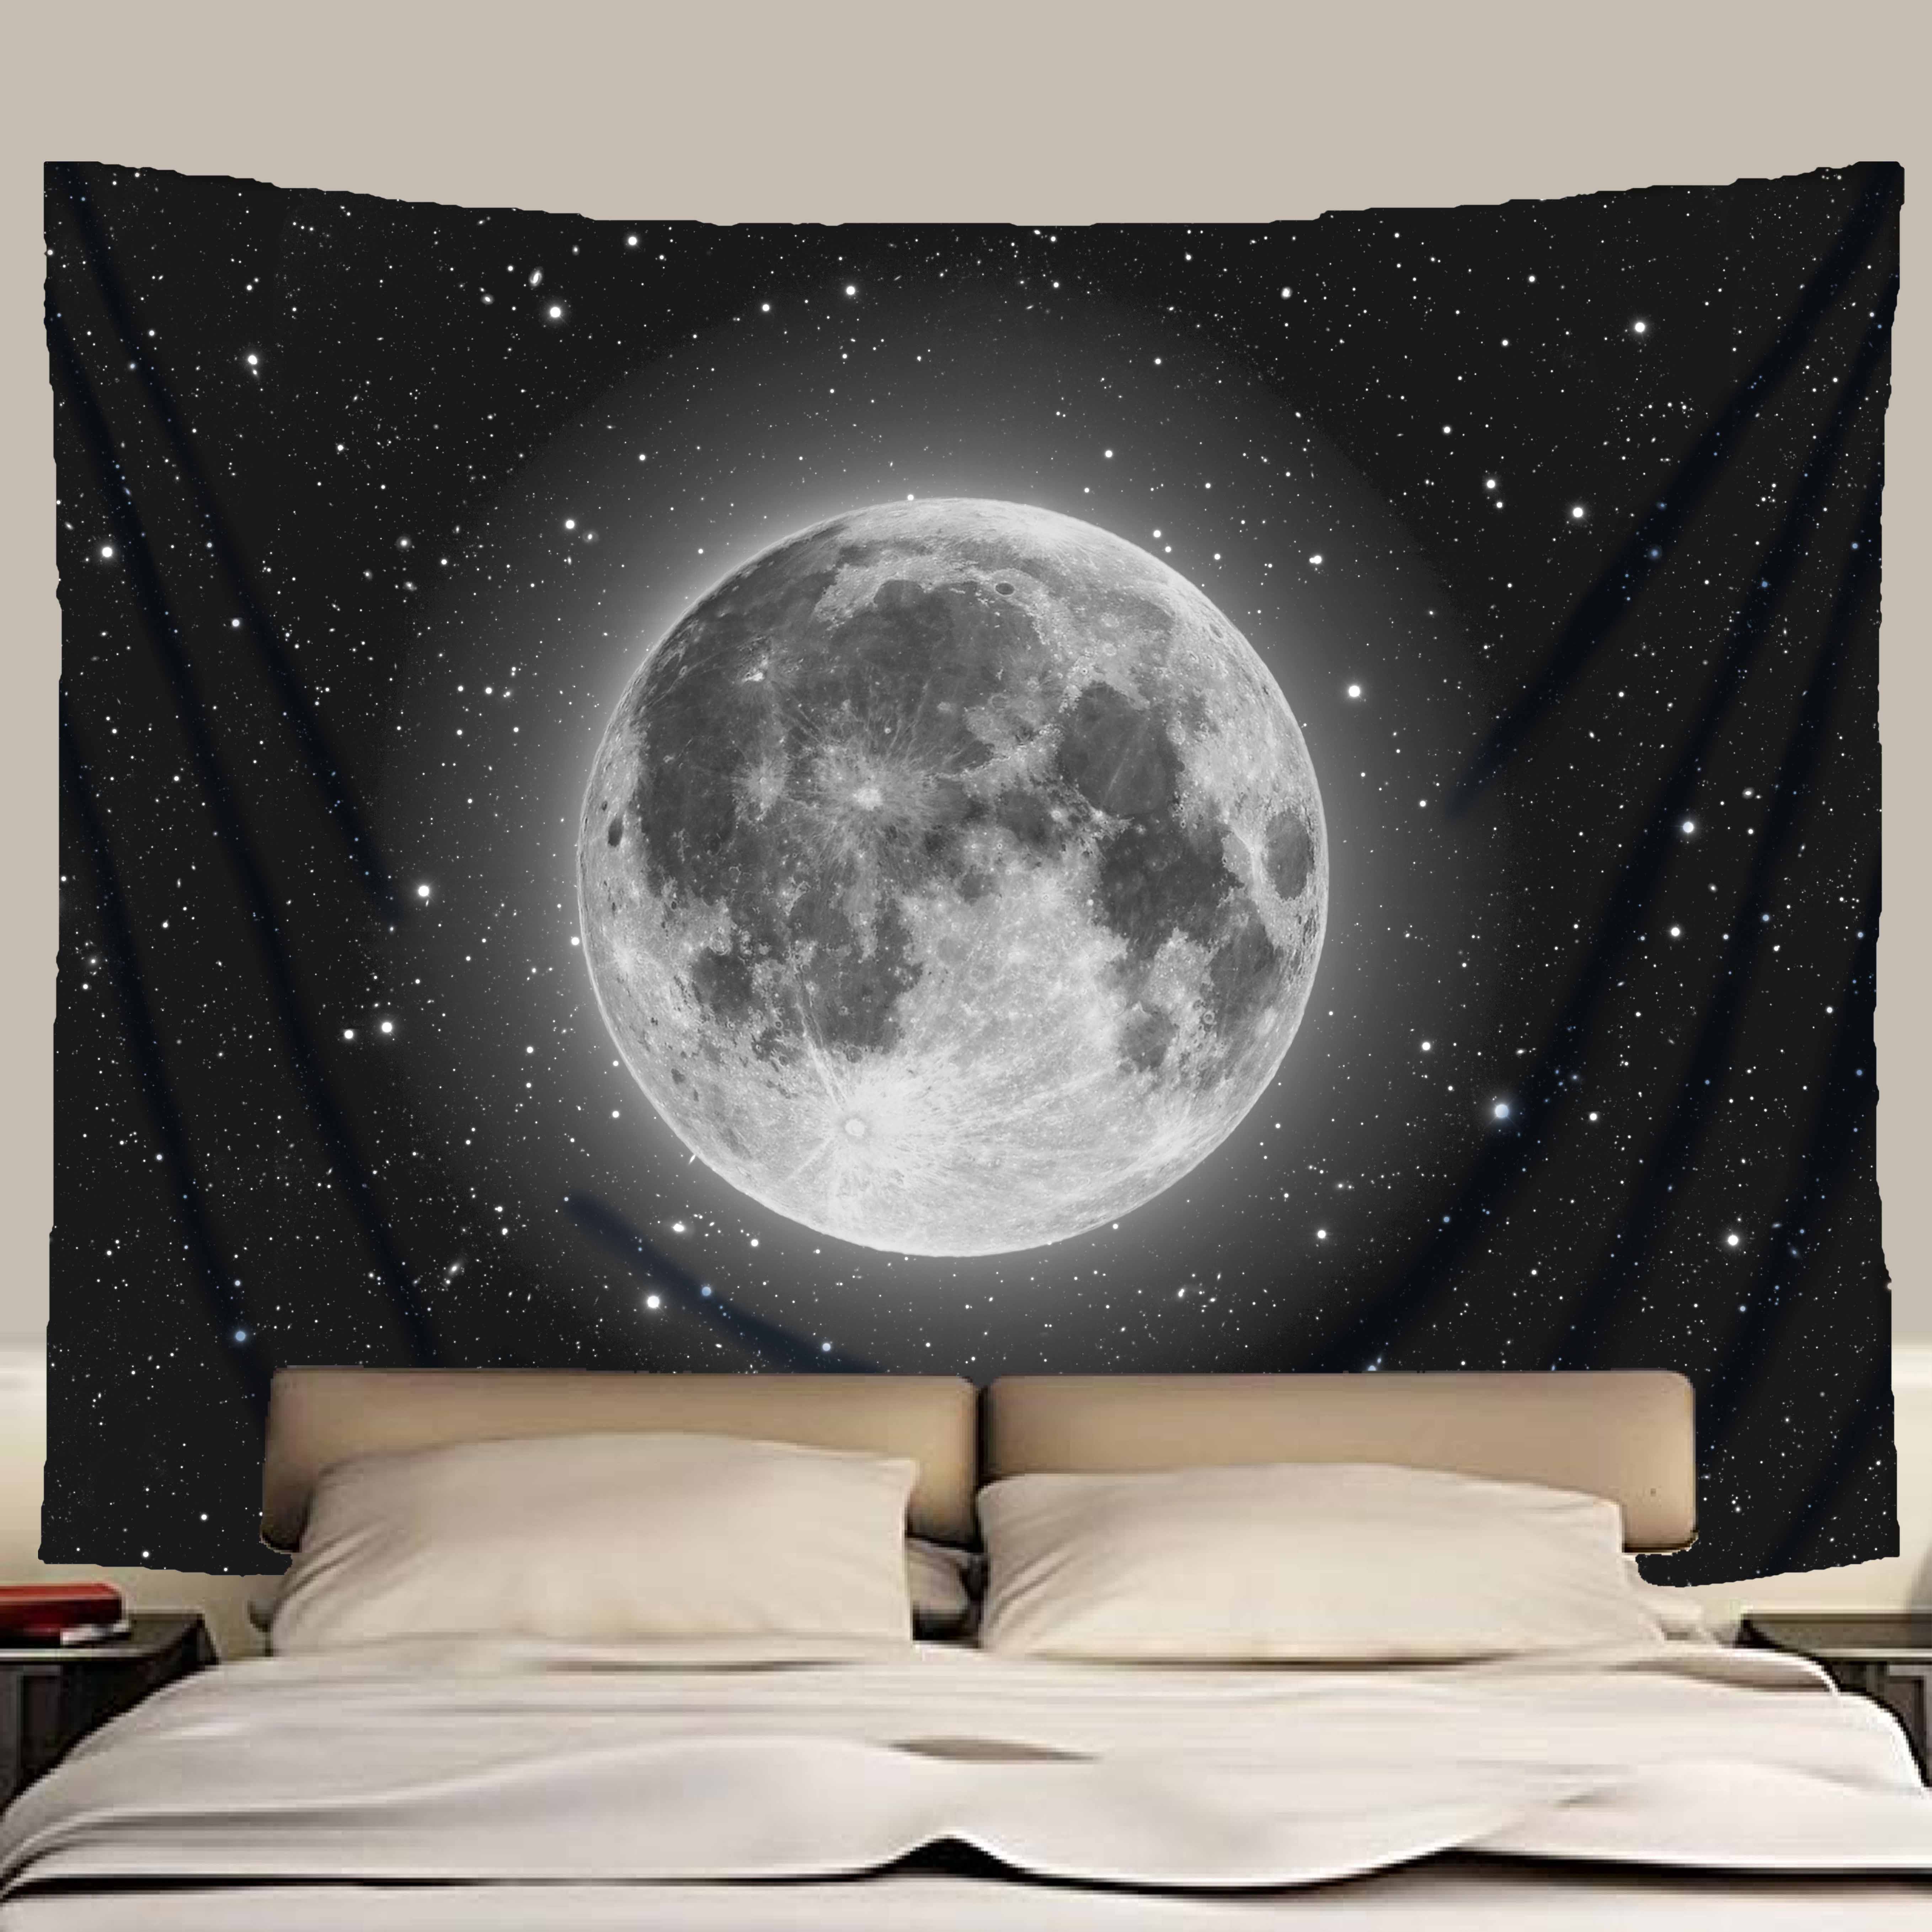 Tapestry Wall Hanging Space And Earth Pattern Home Decoration For Living Room Bedroom Dorm Art Deck, Sold As 1 Panel